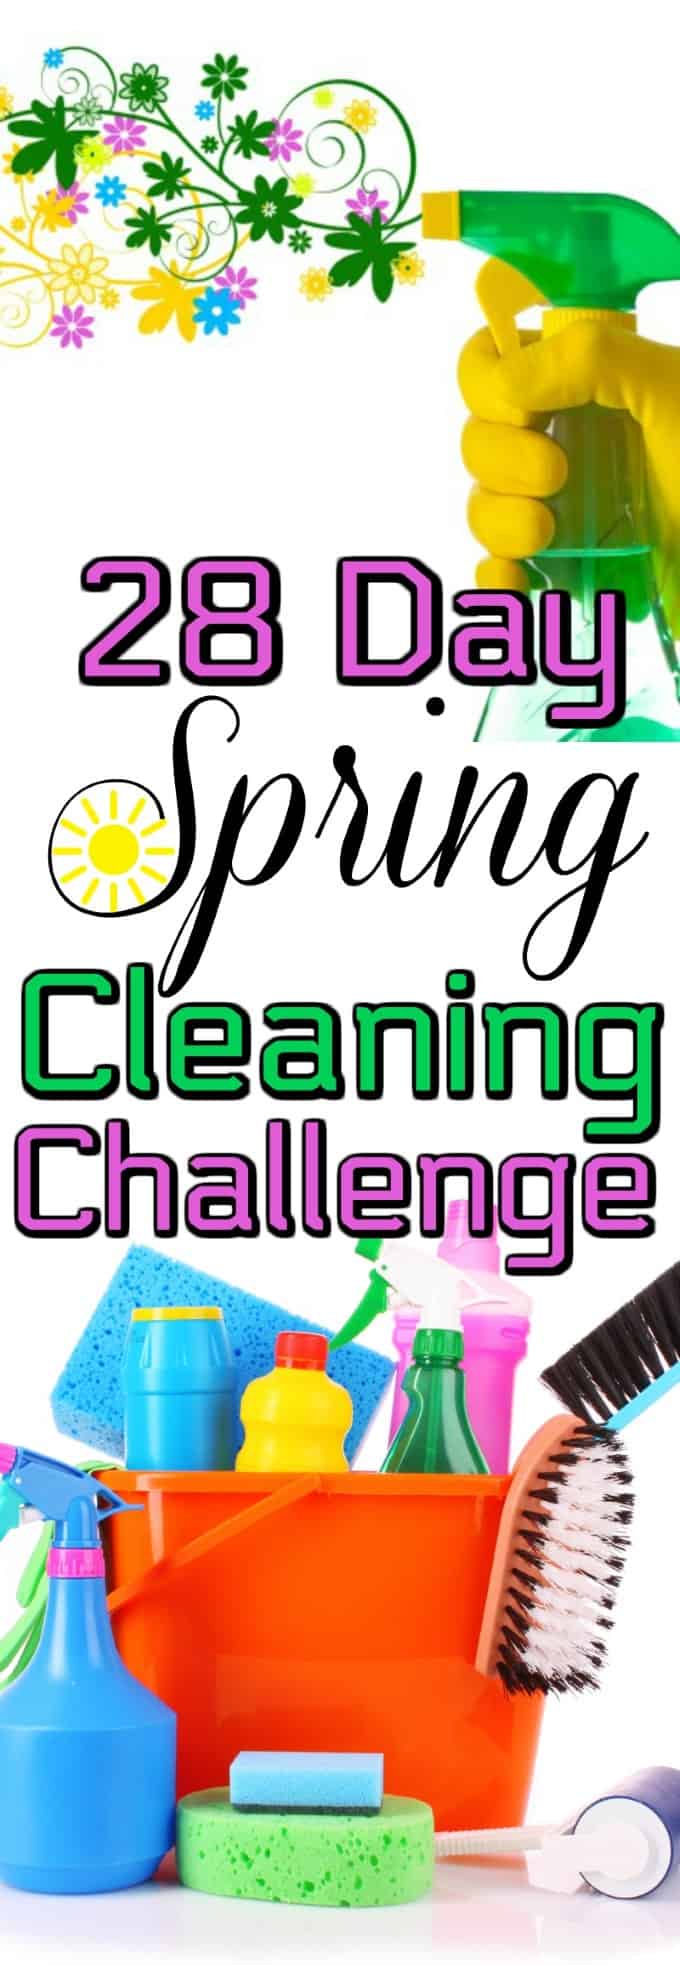 spring cleaning day 2017willlin